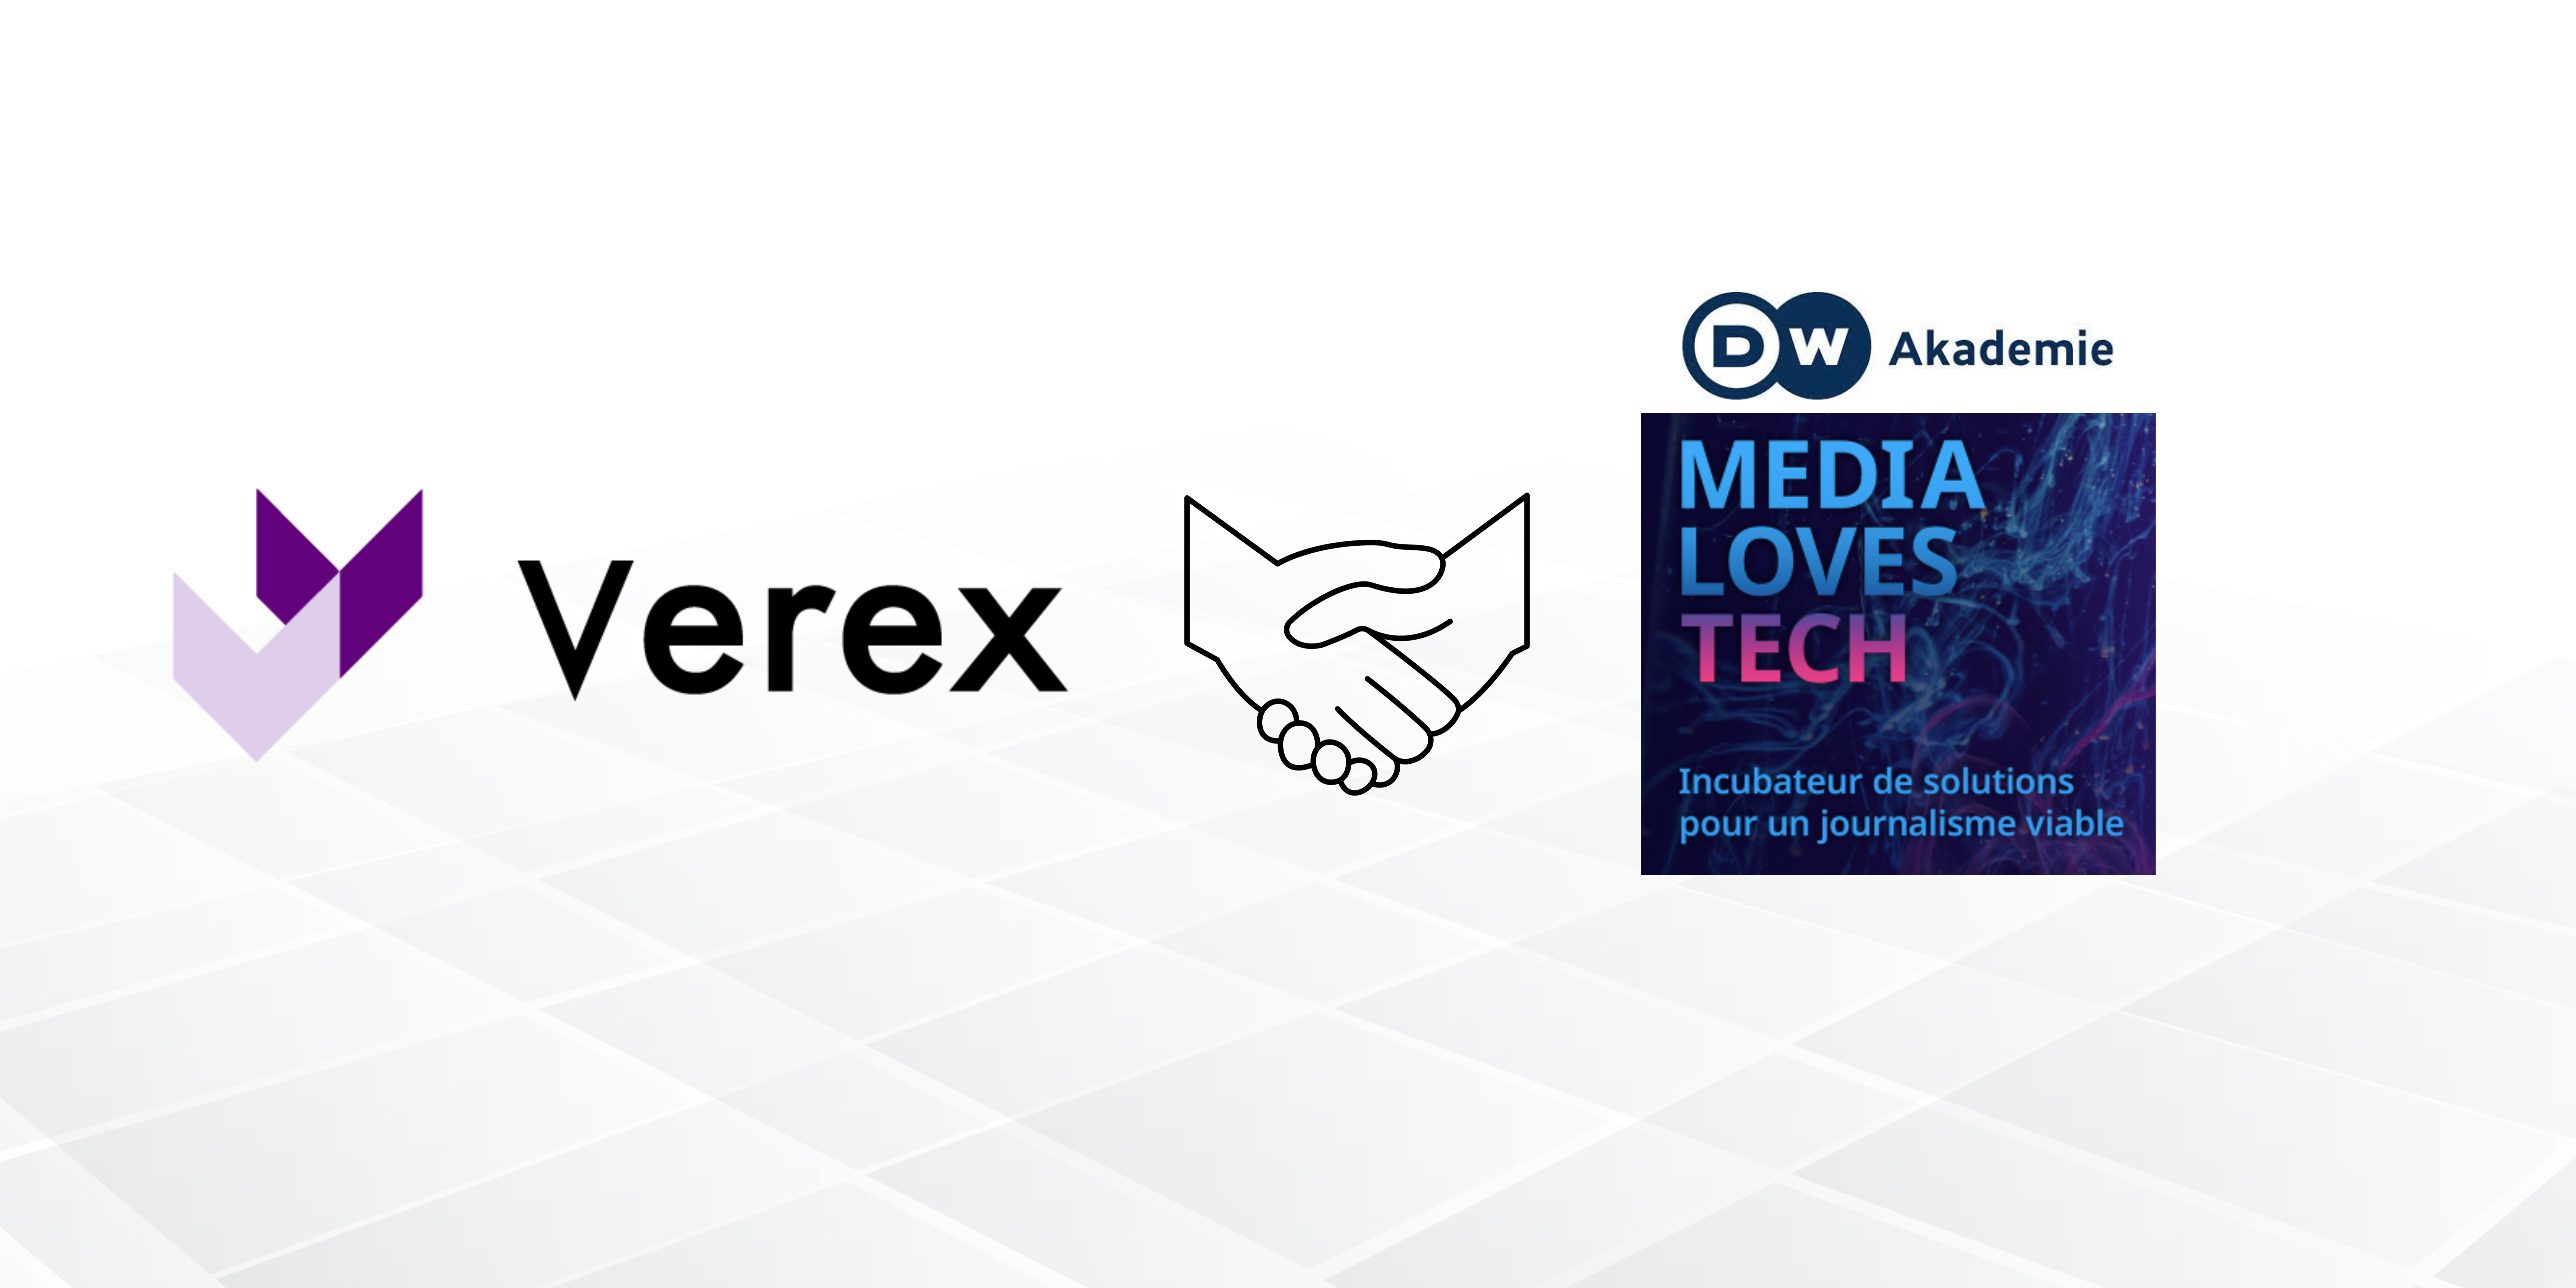 Verex: From Incubation to Innovation – The Media Loves Tech Journey